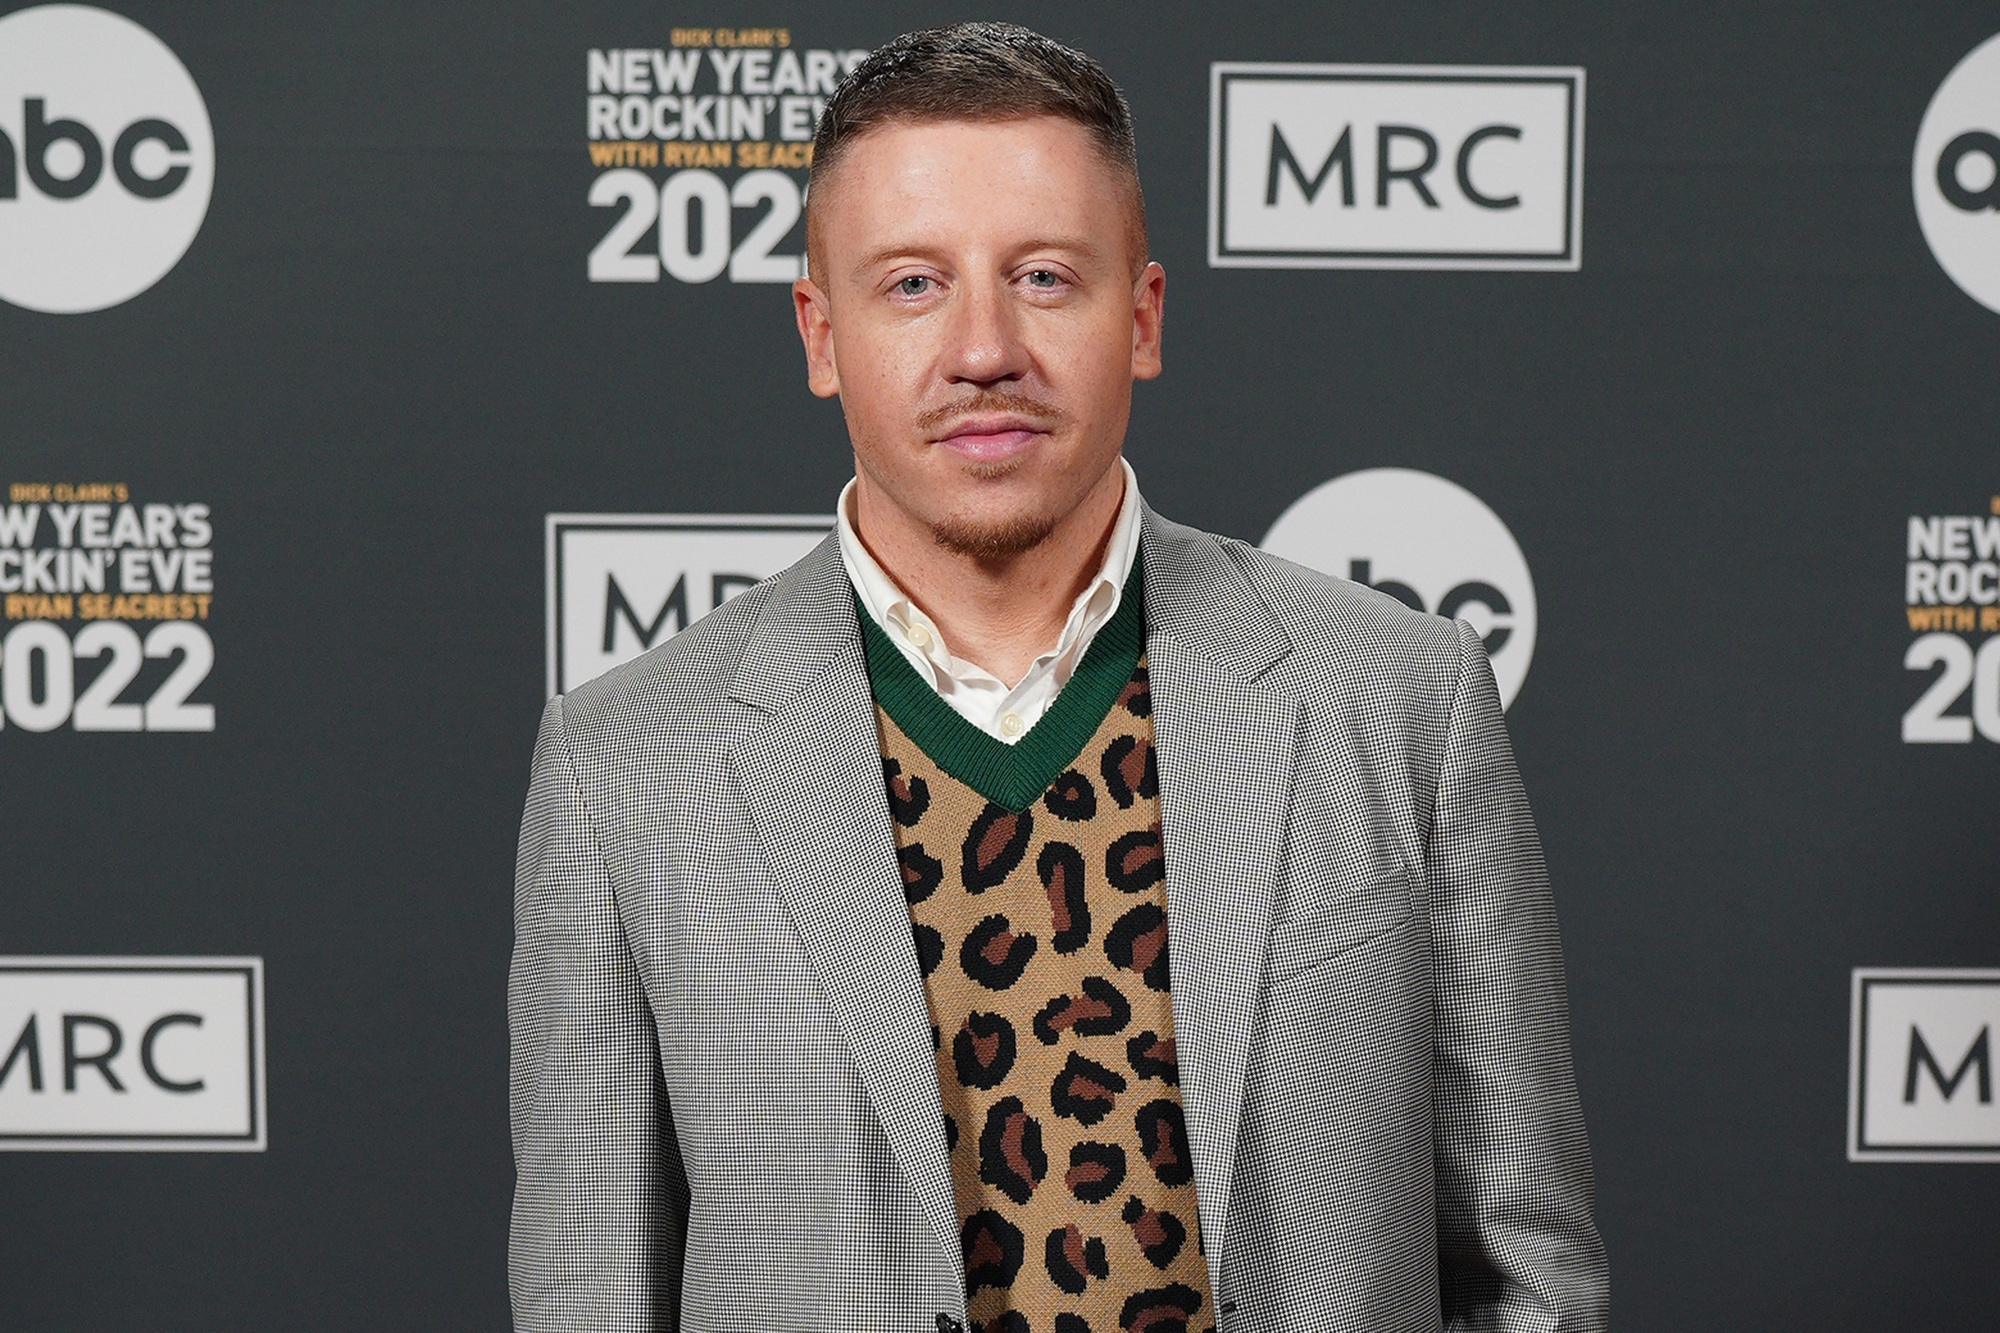 Macklemore recovery journey, Overcoming obstacles, Sobriety celebration, Personal growth, 2000x1340 HD Desktop